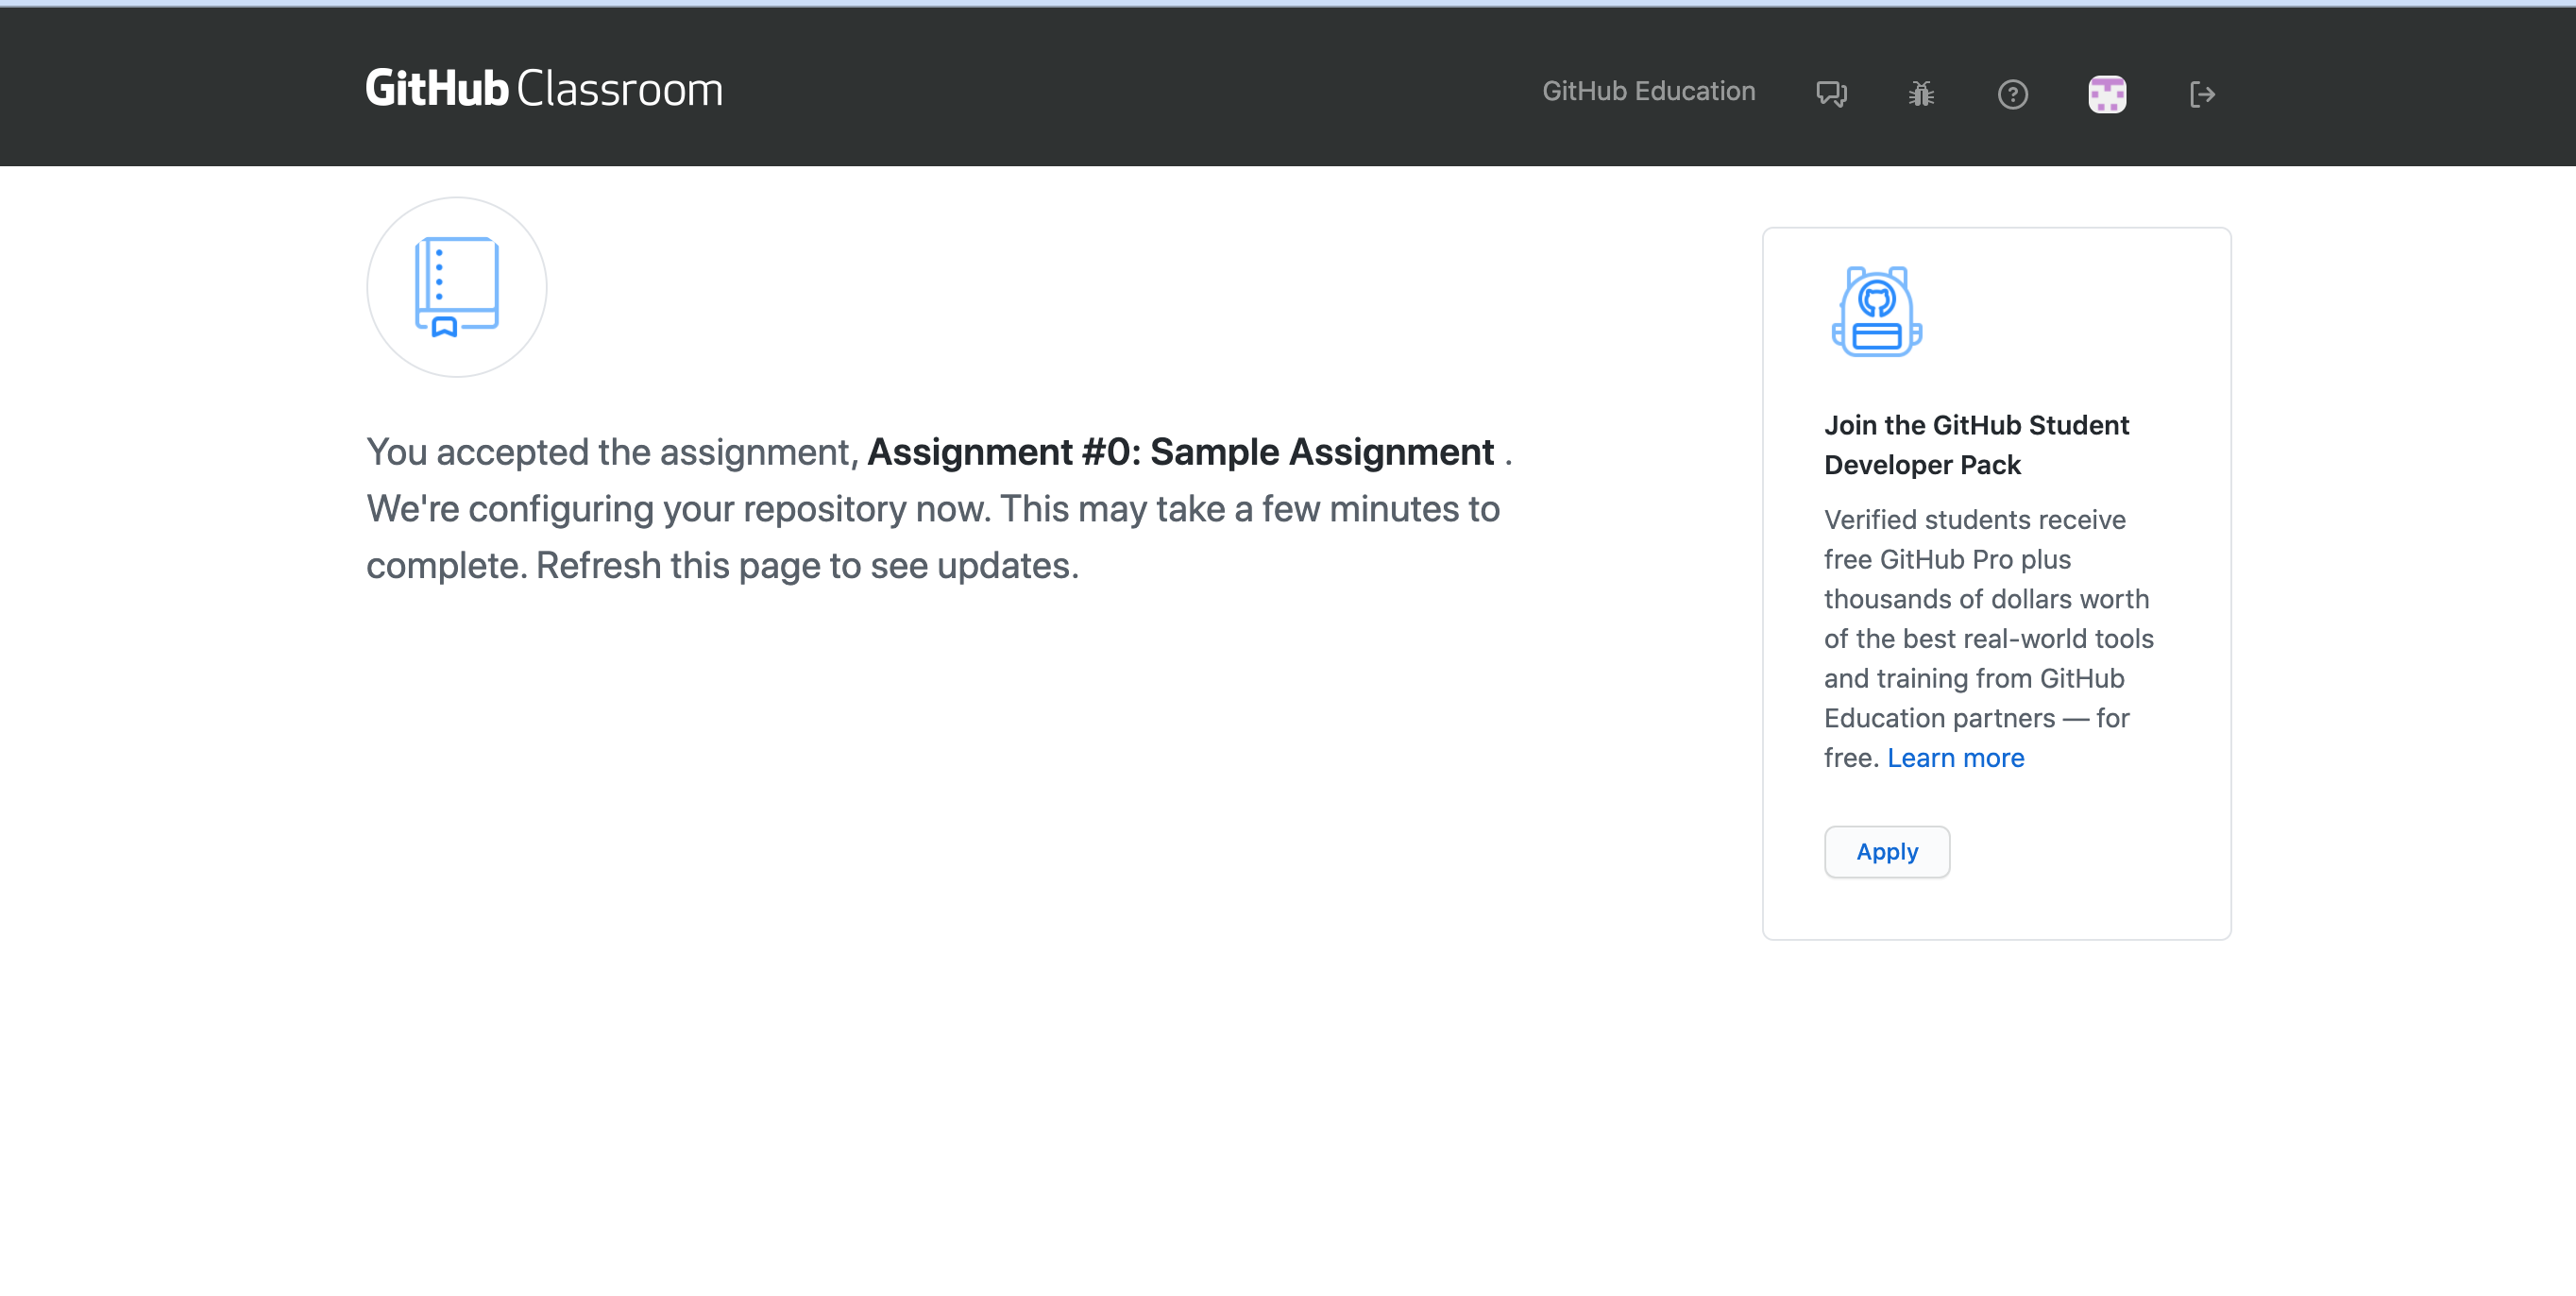 A GitHub Classroom assignment creation page.